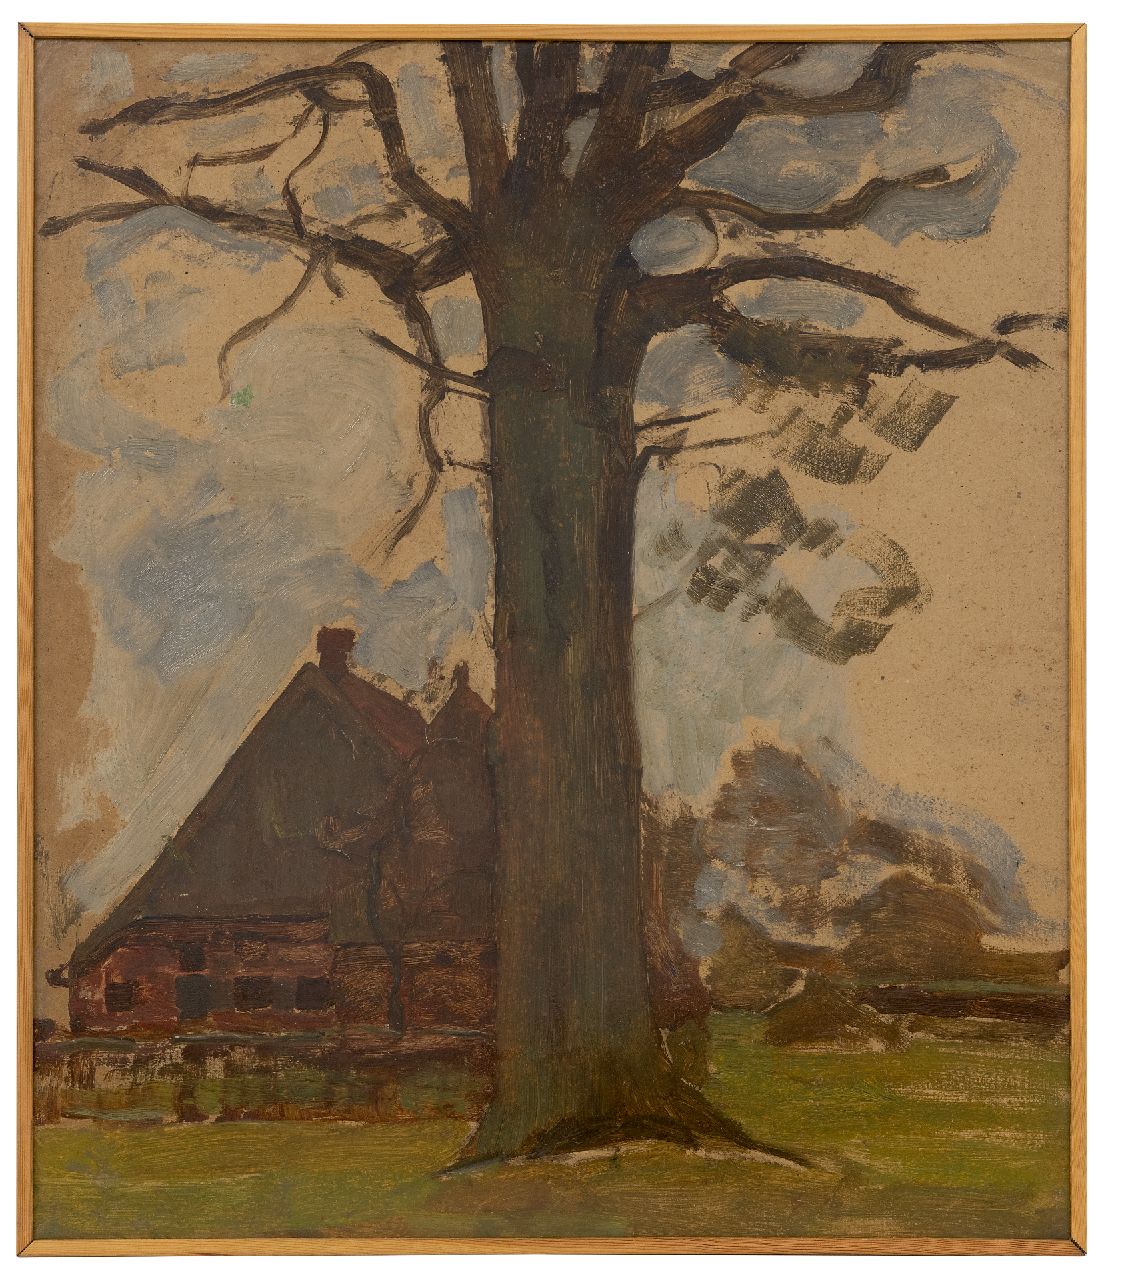 Mondriaan P.C.  | Pieter Cornelis 'Piet' Mondriaan | Paintings offered for sale | Farm with tree, oil on board laid down on panel 75.5 x 64.0 cm, painted circa 1906-1907